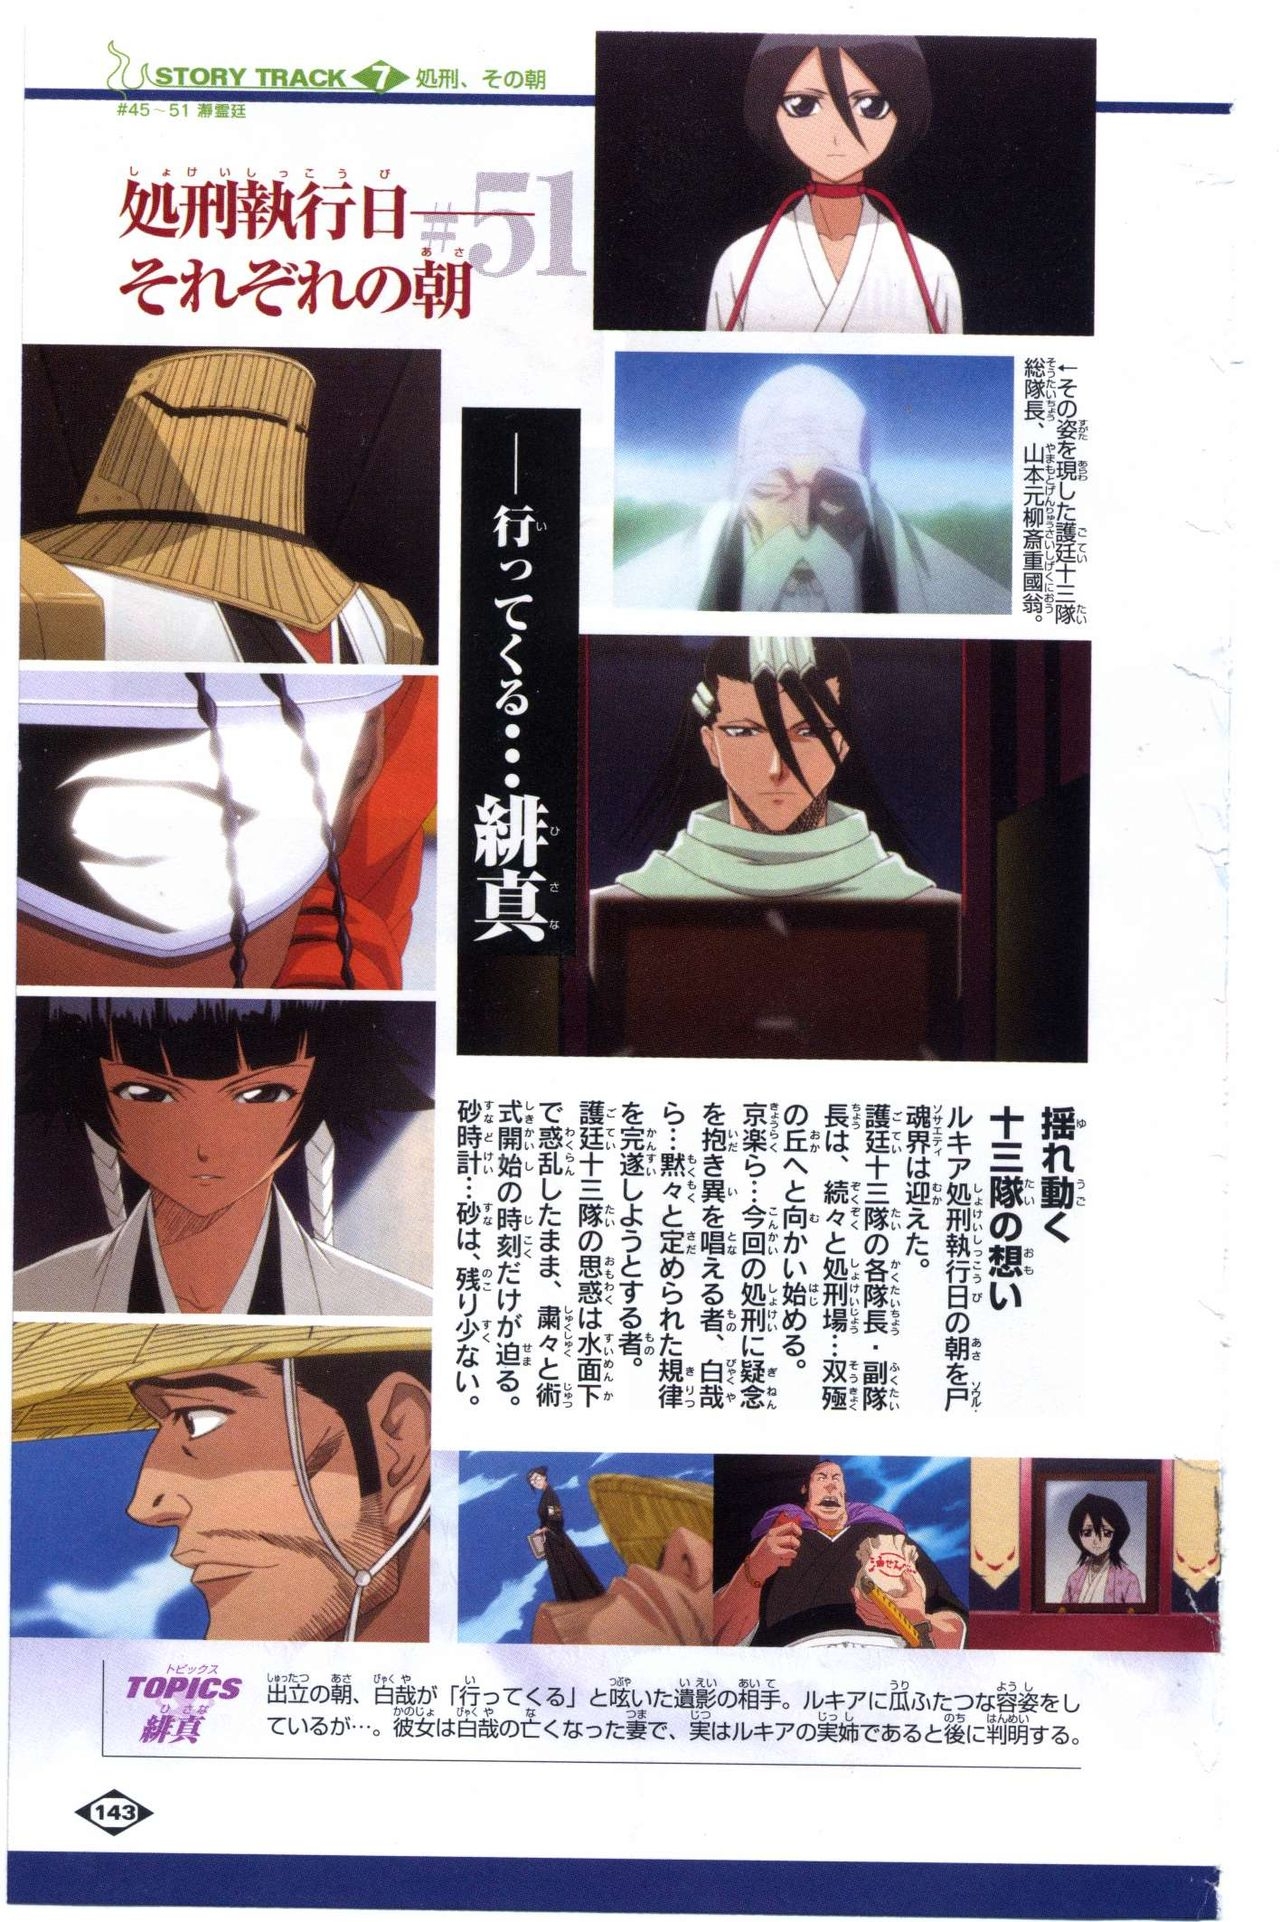 Bleach: Official Animation Book VIBEs 143